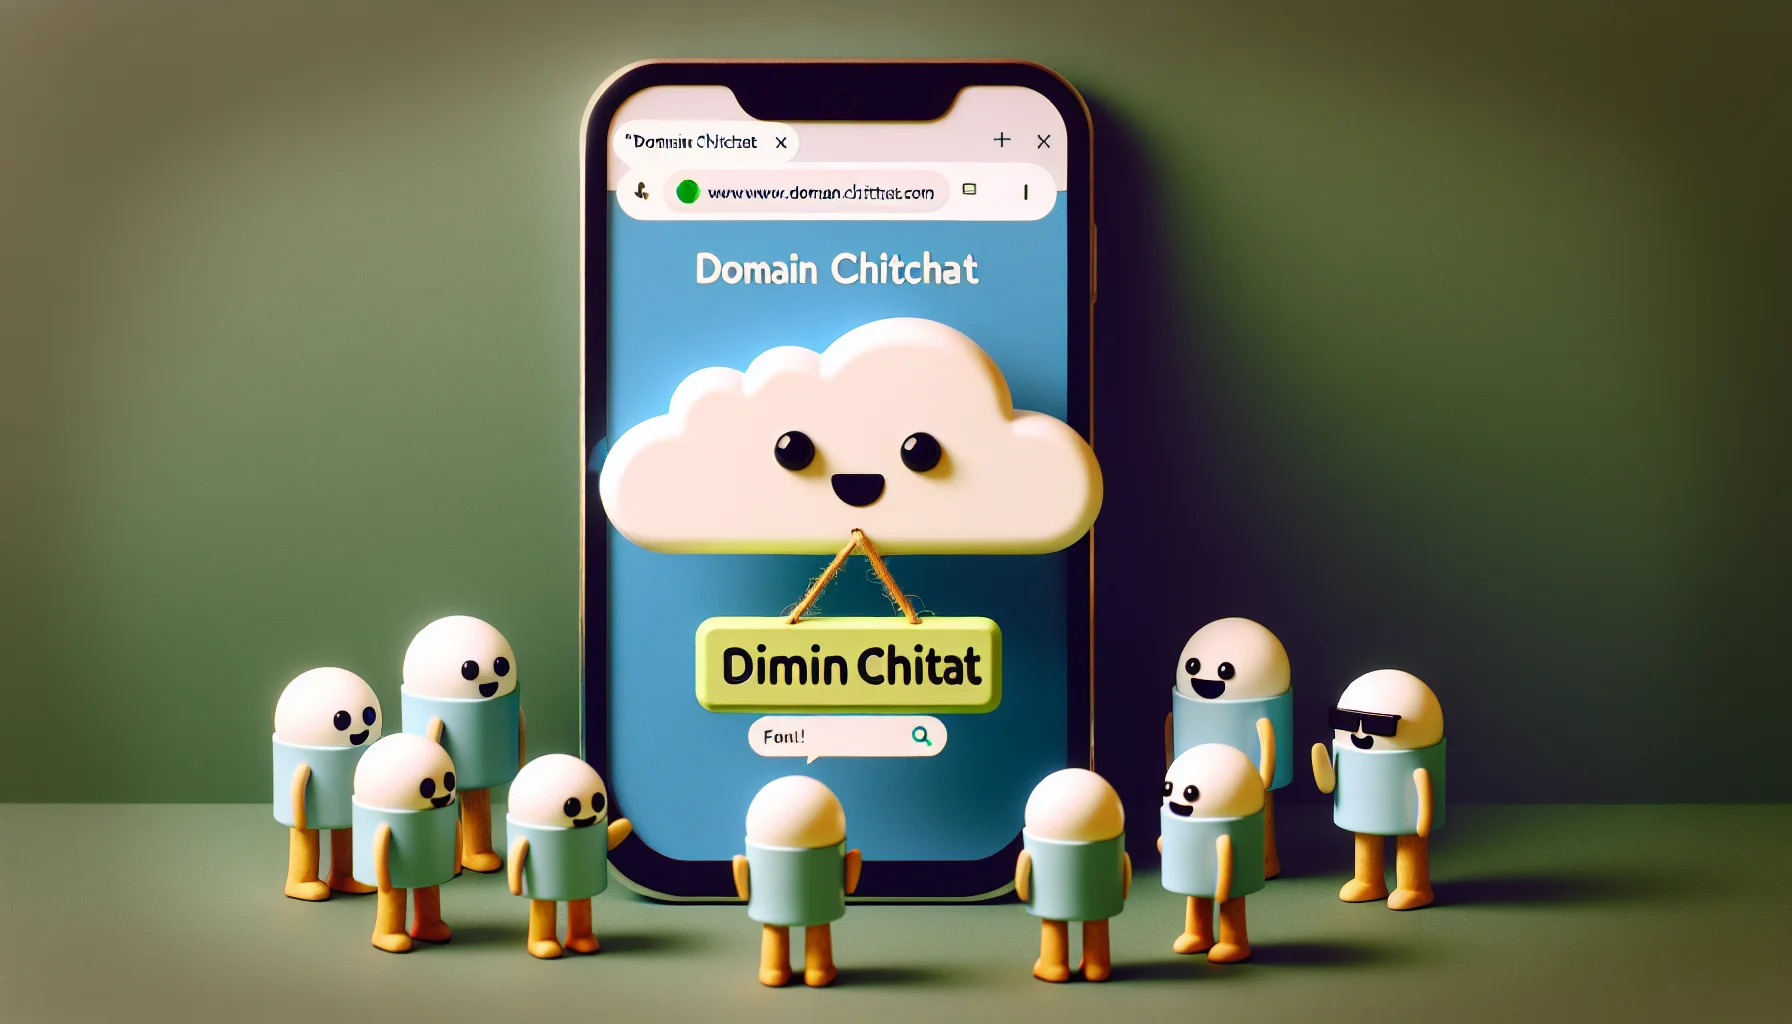 Generate a humorous scene featuring a fictional web hosting app named 'Domain Chitchat'. The app logo consists of a small, chatty cloud holding a domain icon. The cloud is engaged in a amusing conversation with web browsers represented as quirky, anthropomorphized characters, each one displaying a variety of reactions. The scene evokes a light, playful mood, encouraging users to consider web hosting with 'Domain Chitchat'.